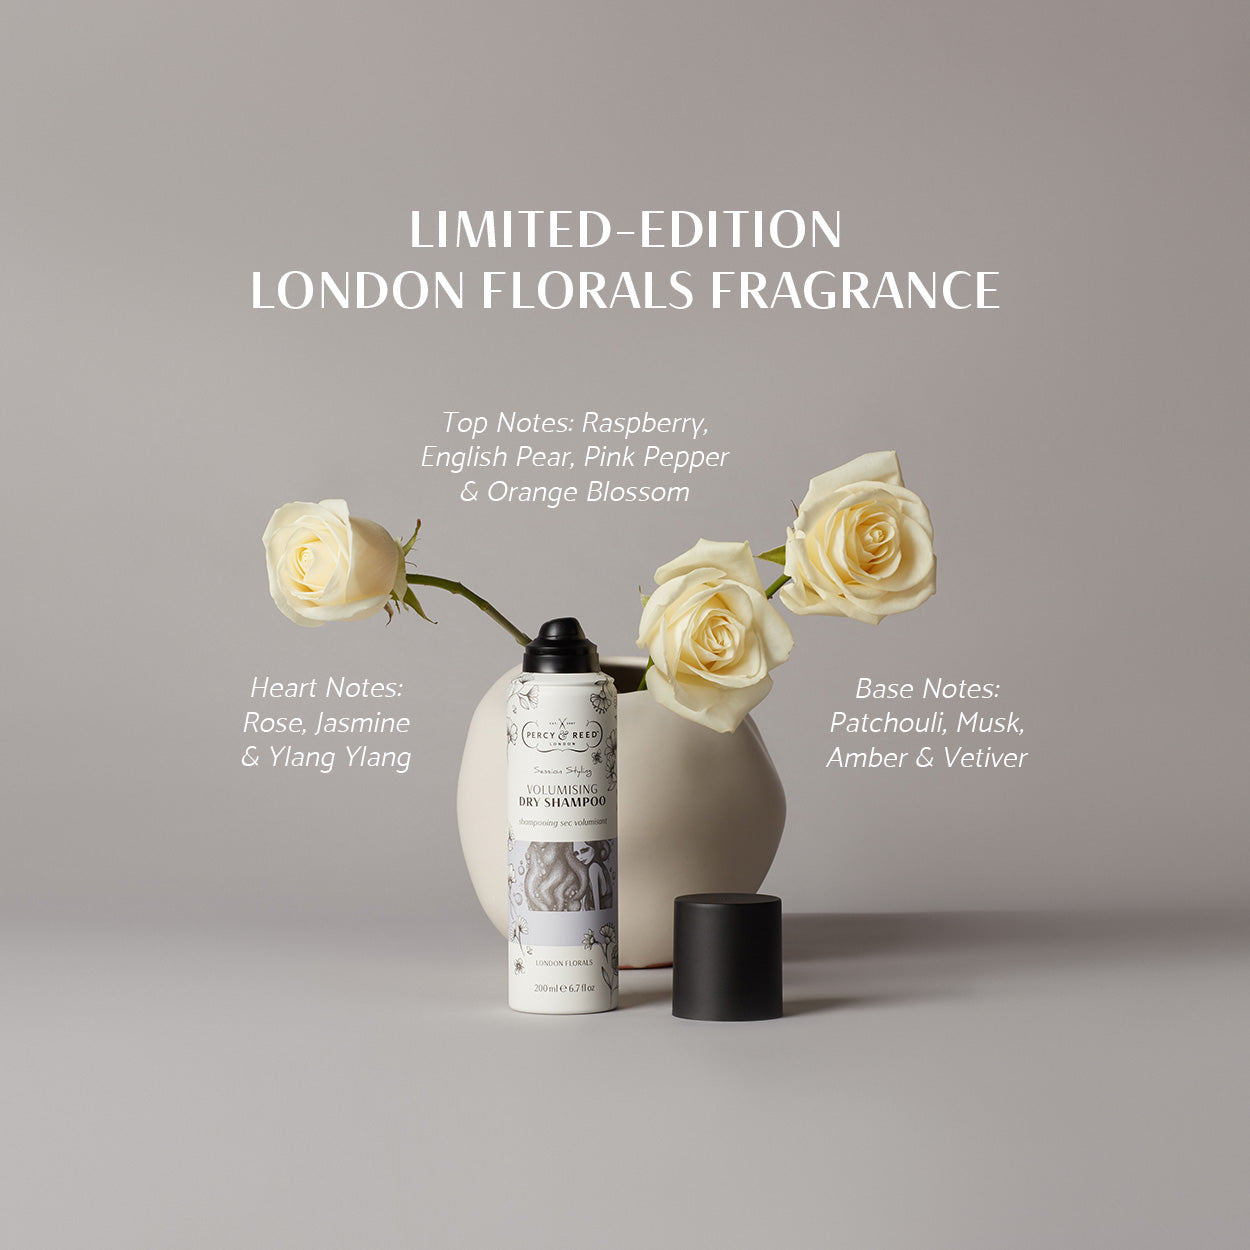 Percy & Reed Session Styling Volumising Dry Shampoo - London Florals Edition